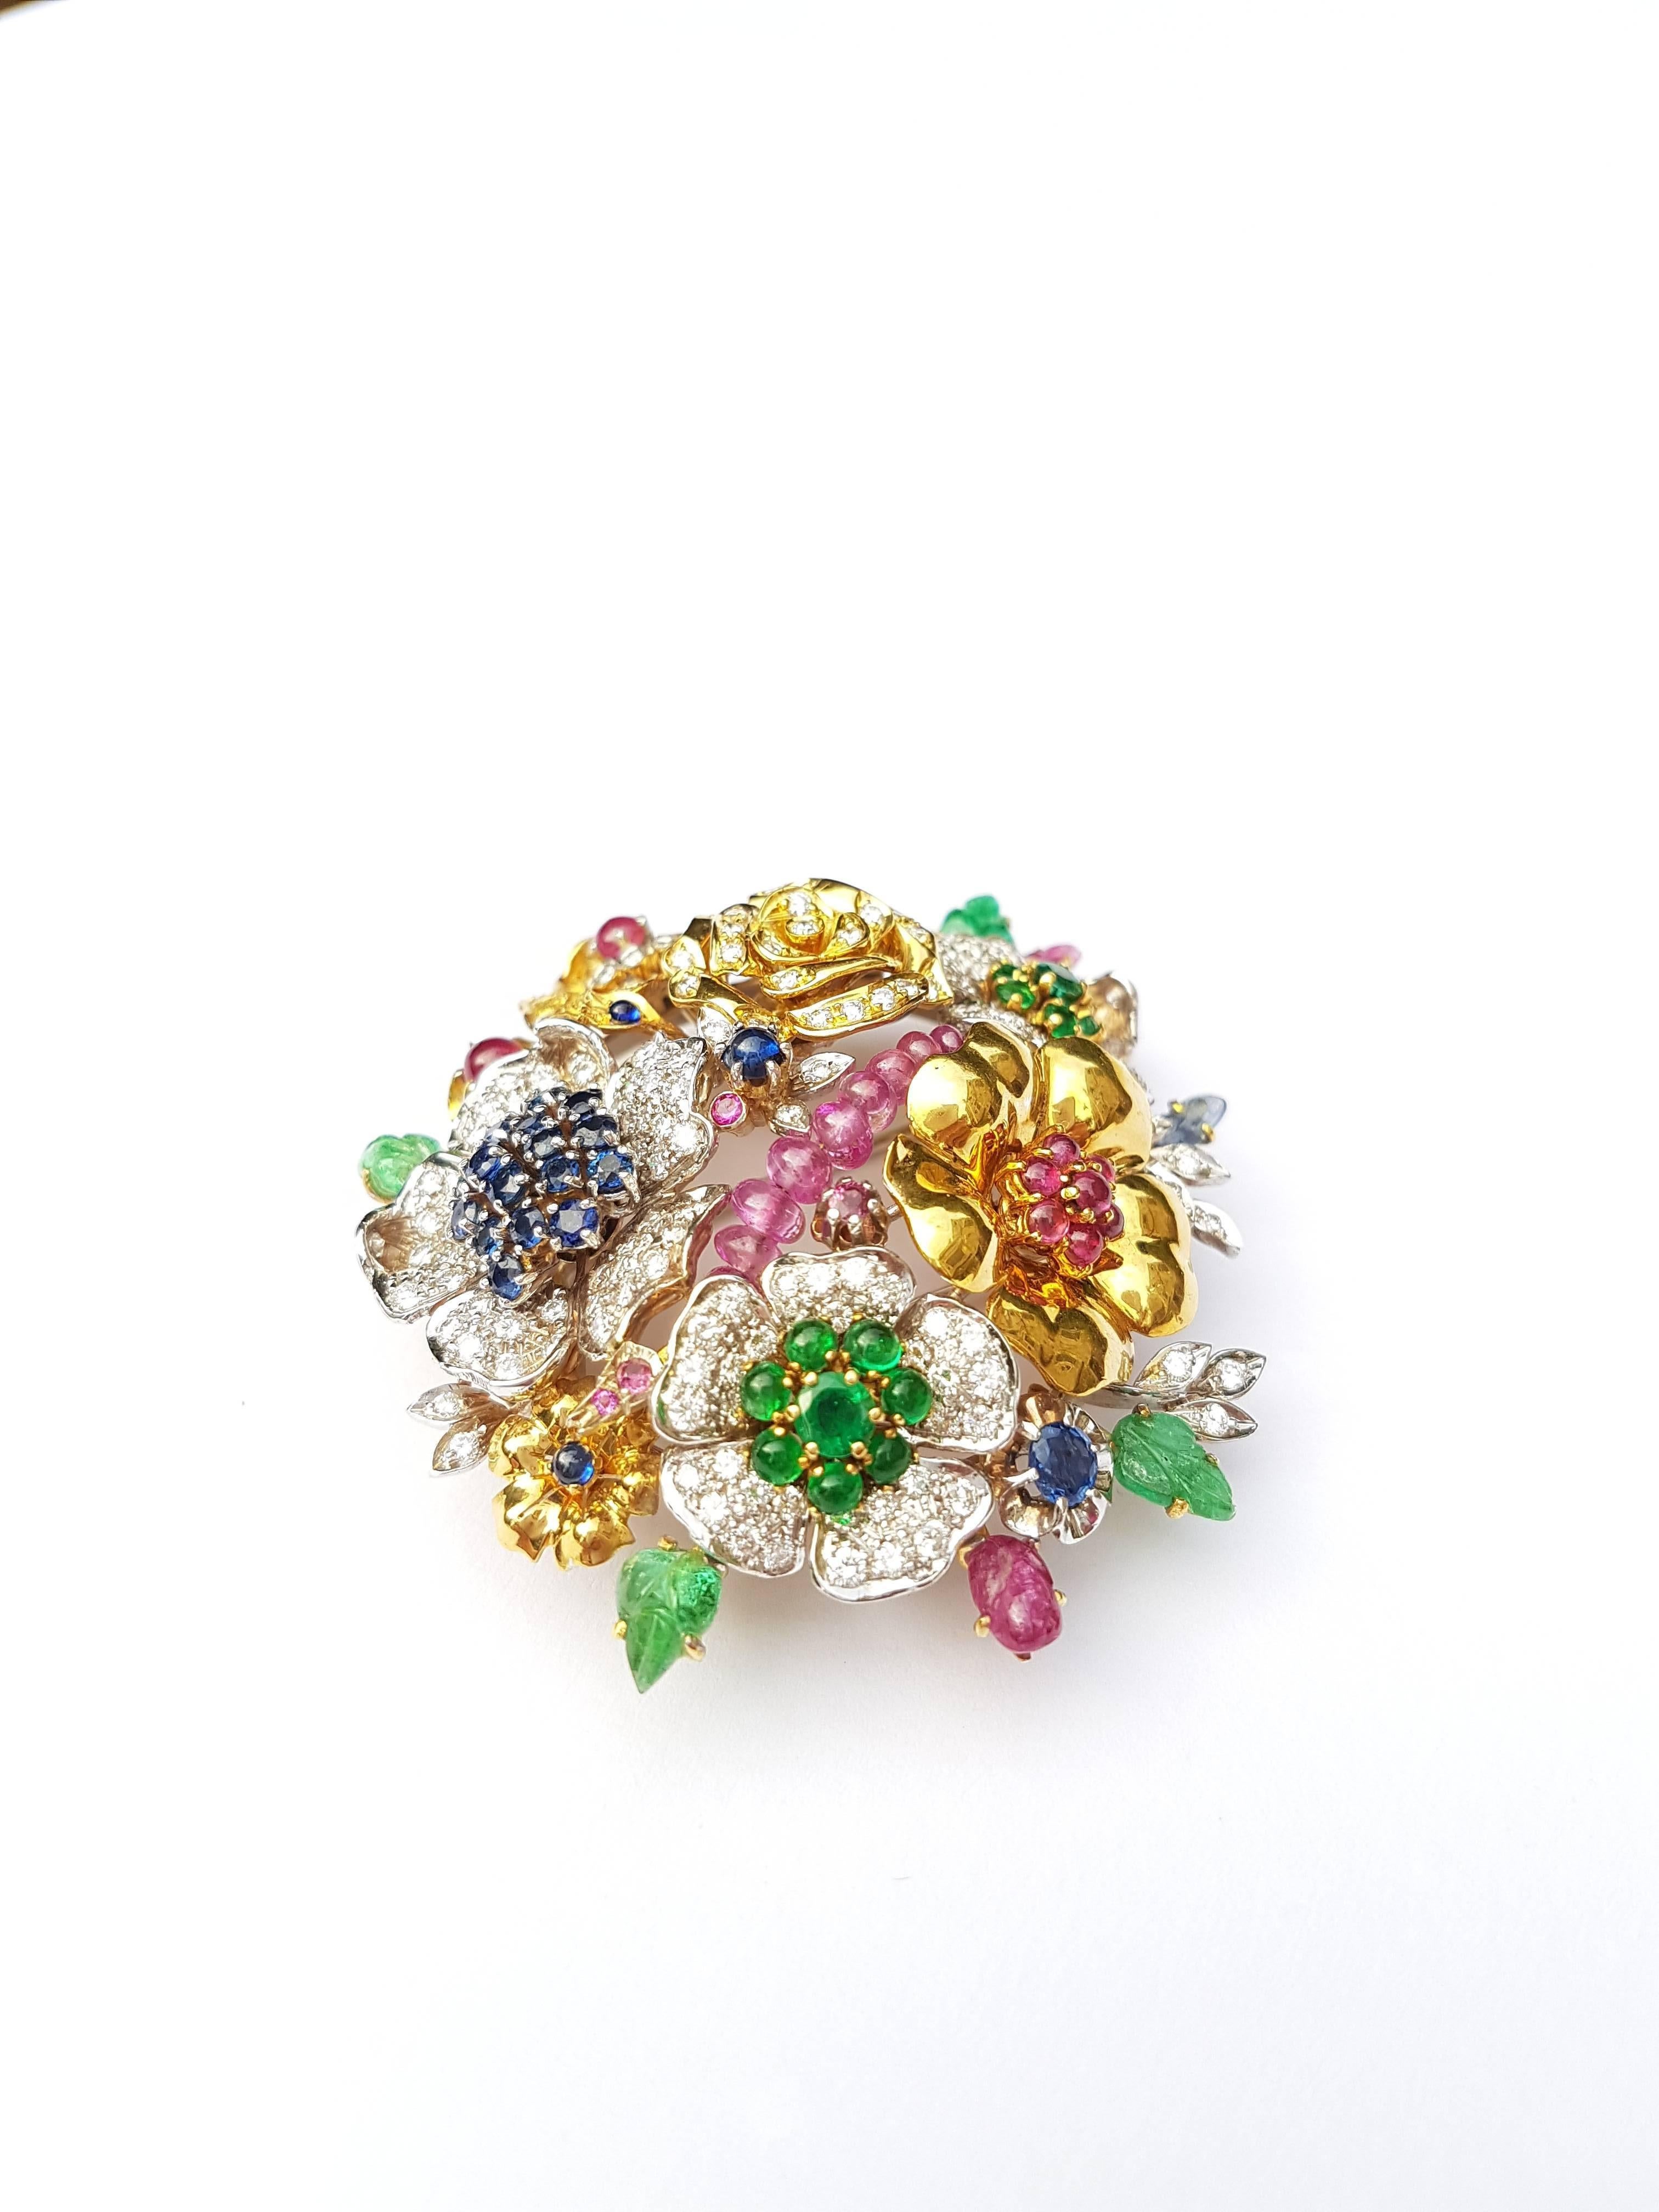  Stunningly Detailed Missiaglia Flower Brooch completely handmade by Venetian Goldsmiths in 18k Yellow and White gold with 2.88 Carats of Sapphires , 1.75 Carats of Emeralds , 3.20 Carats of Diamonds and 1.90 Carats of Pink Rubies.